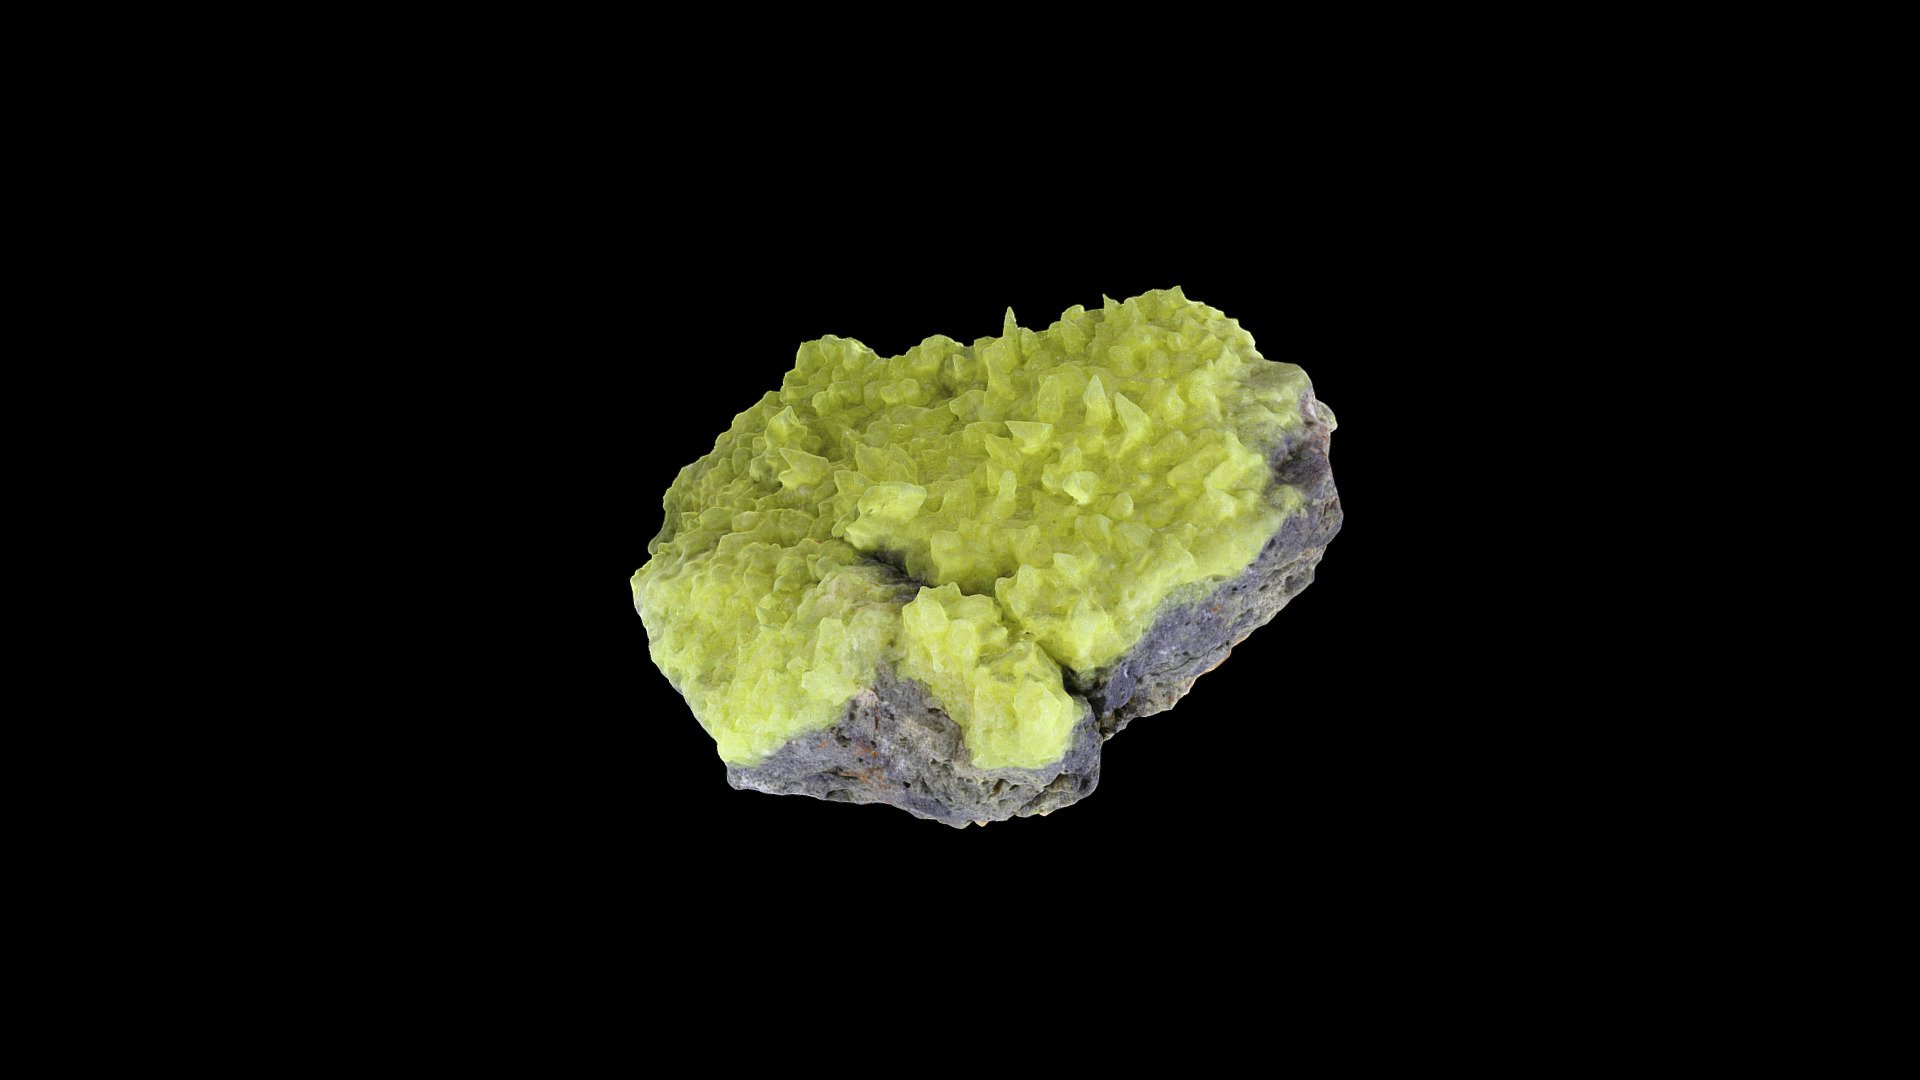 The yellow minerals seen here is native sufur. It appears to have precipitated on altered basalt &ndash; almost certainly from sulfur-rich volcanic gases 3d model